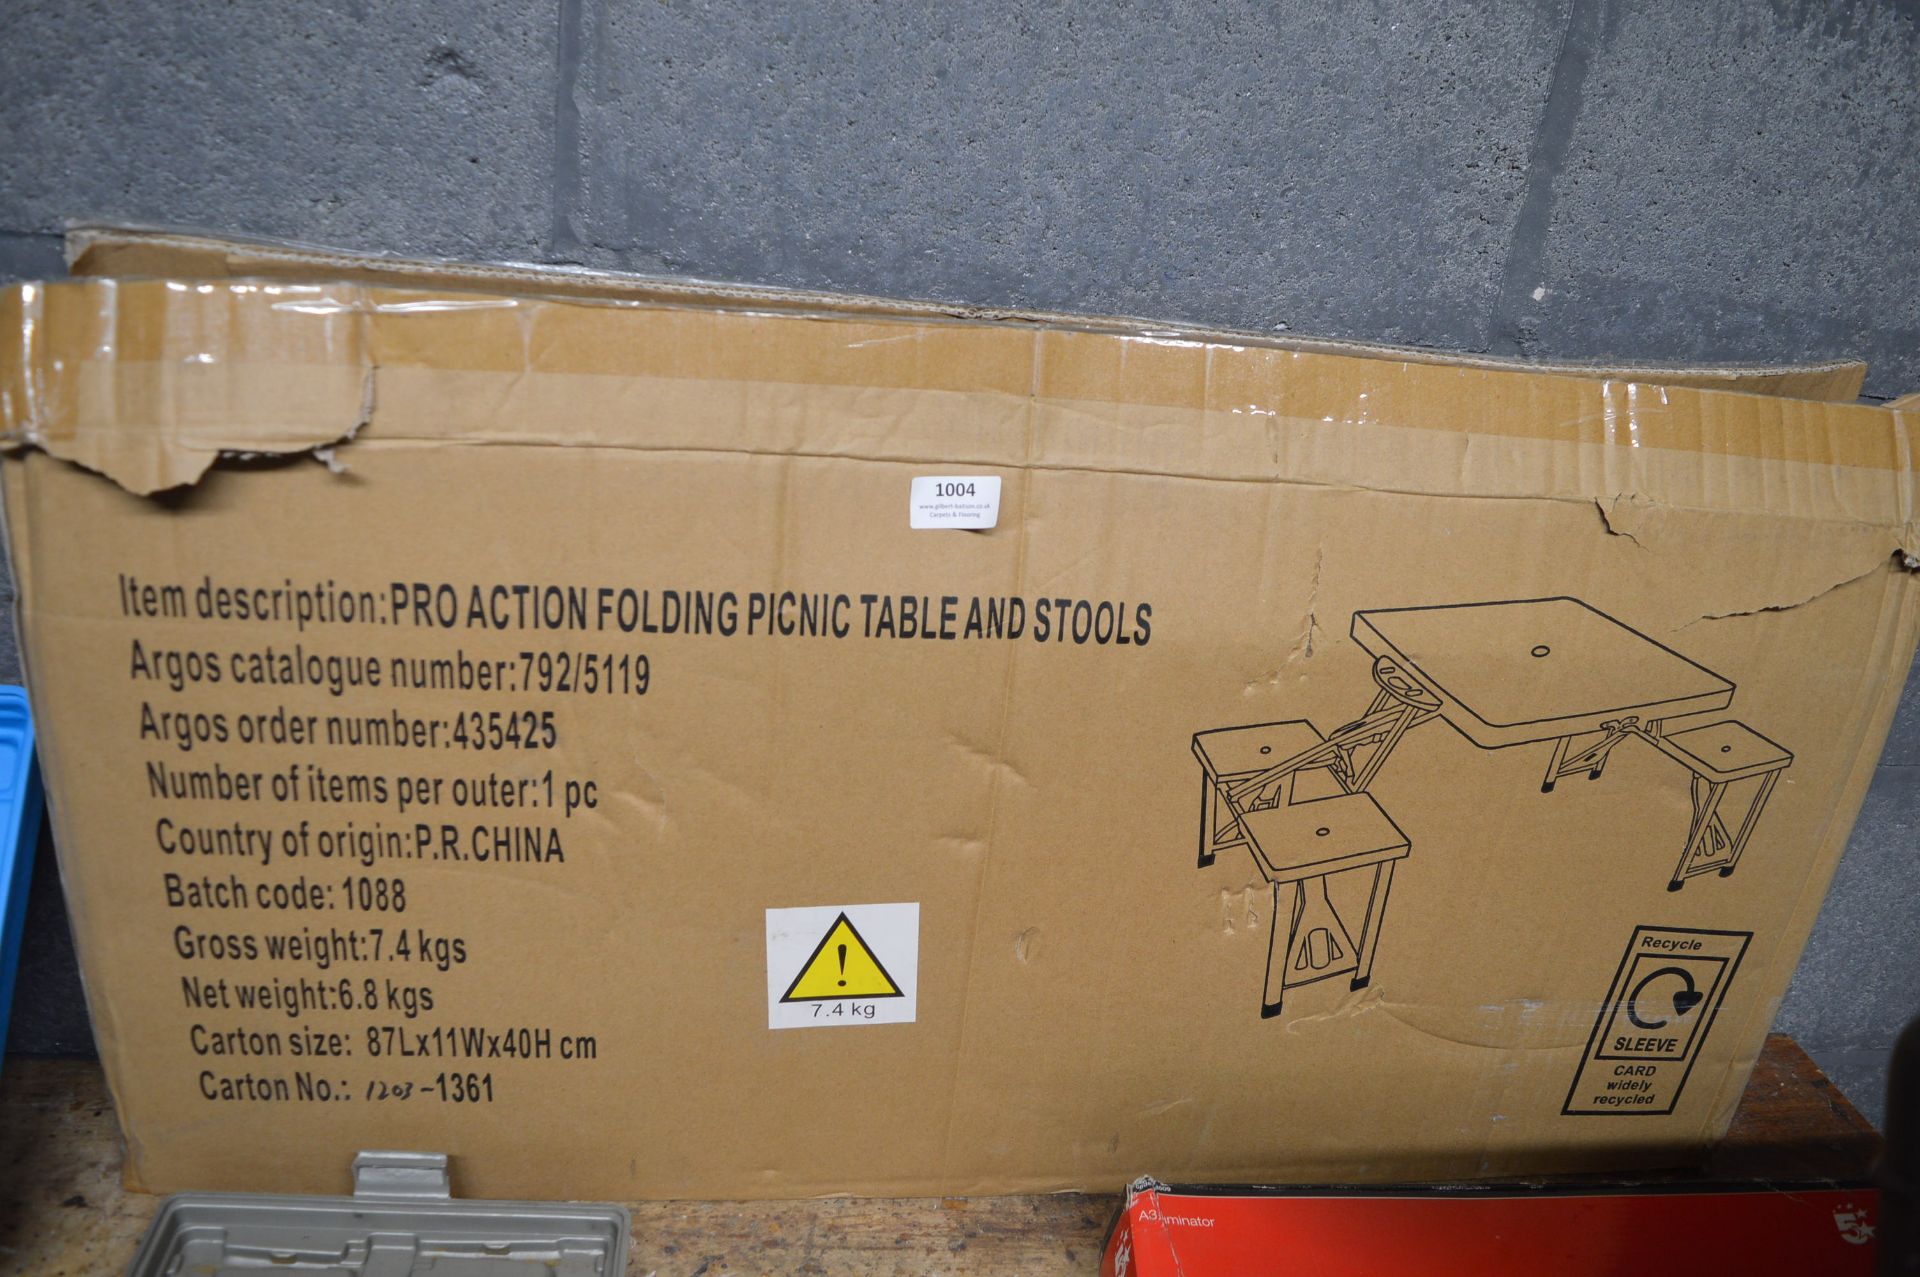 Pro Action Folding Picnic Table and Stools